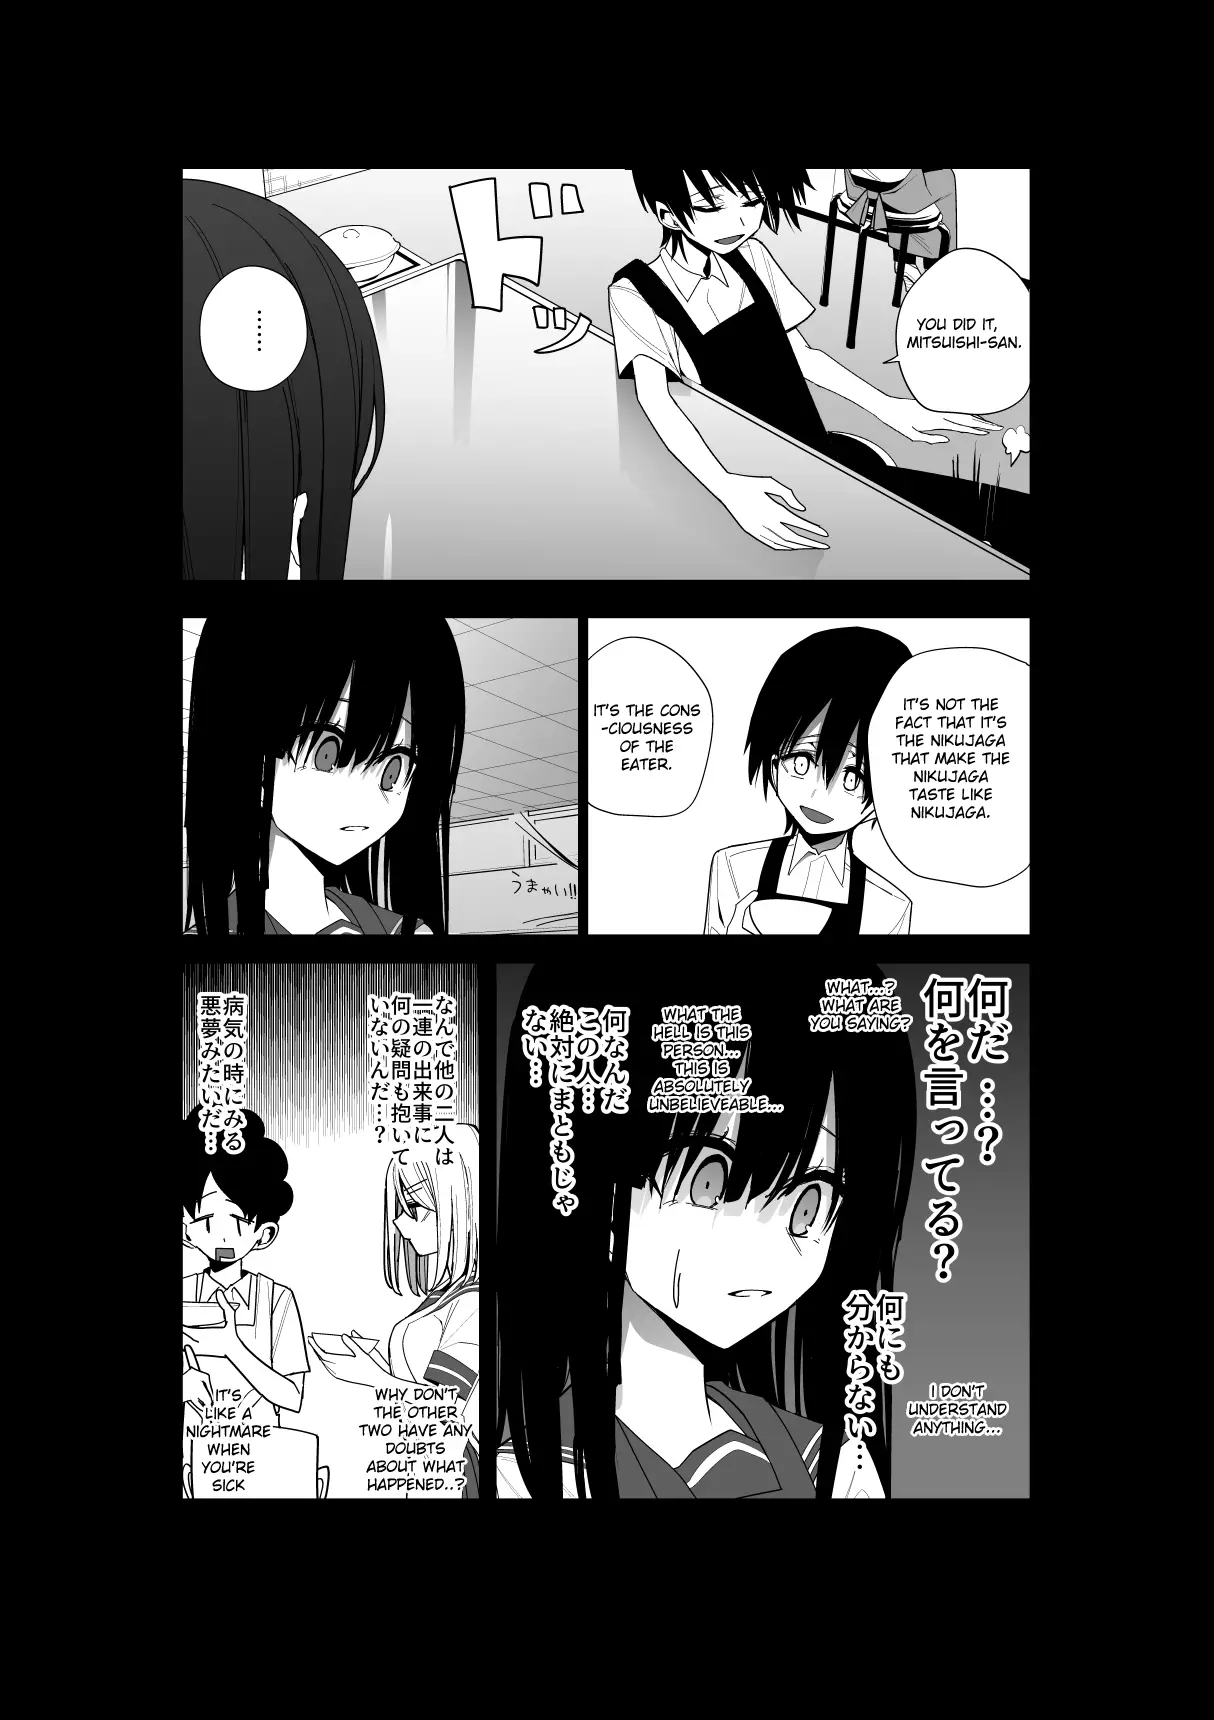 Mitsuishi-San Is Being Weird This Year - 25 page 22-14941784